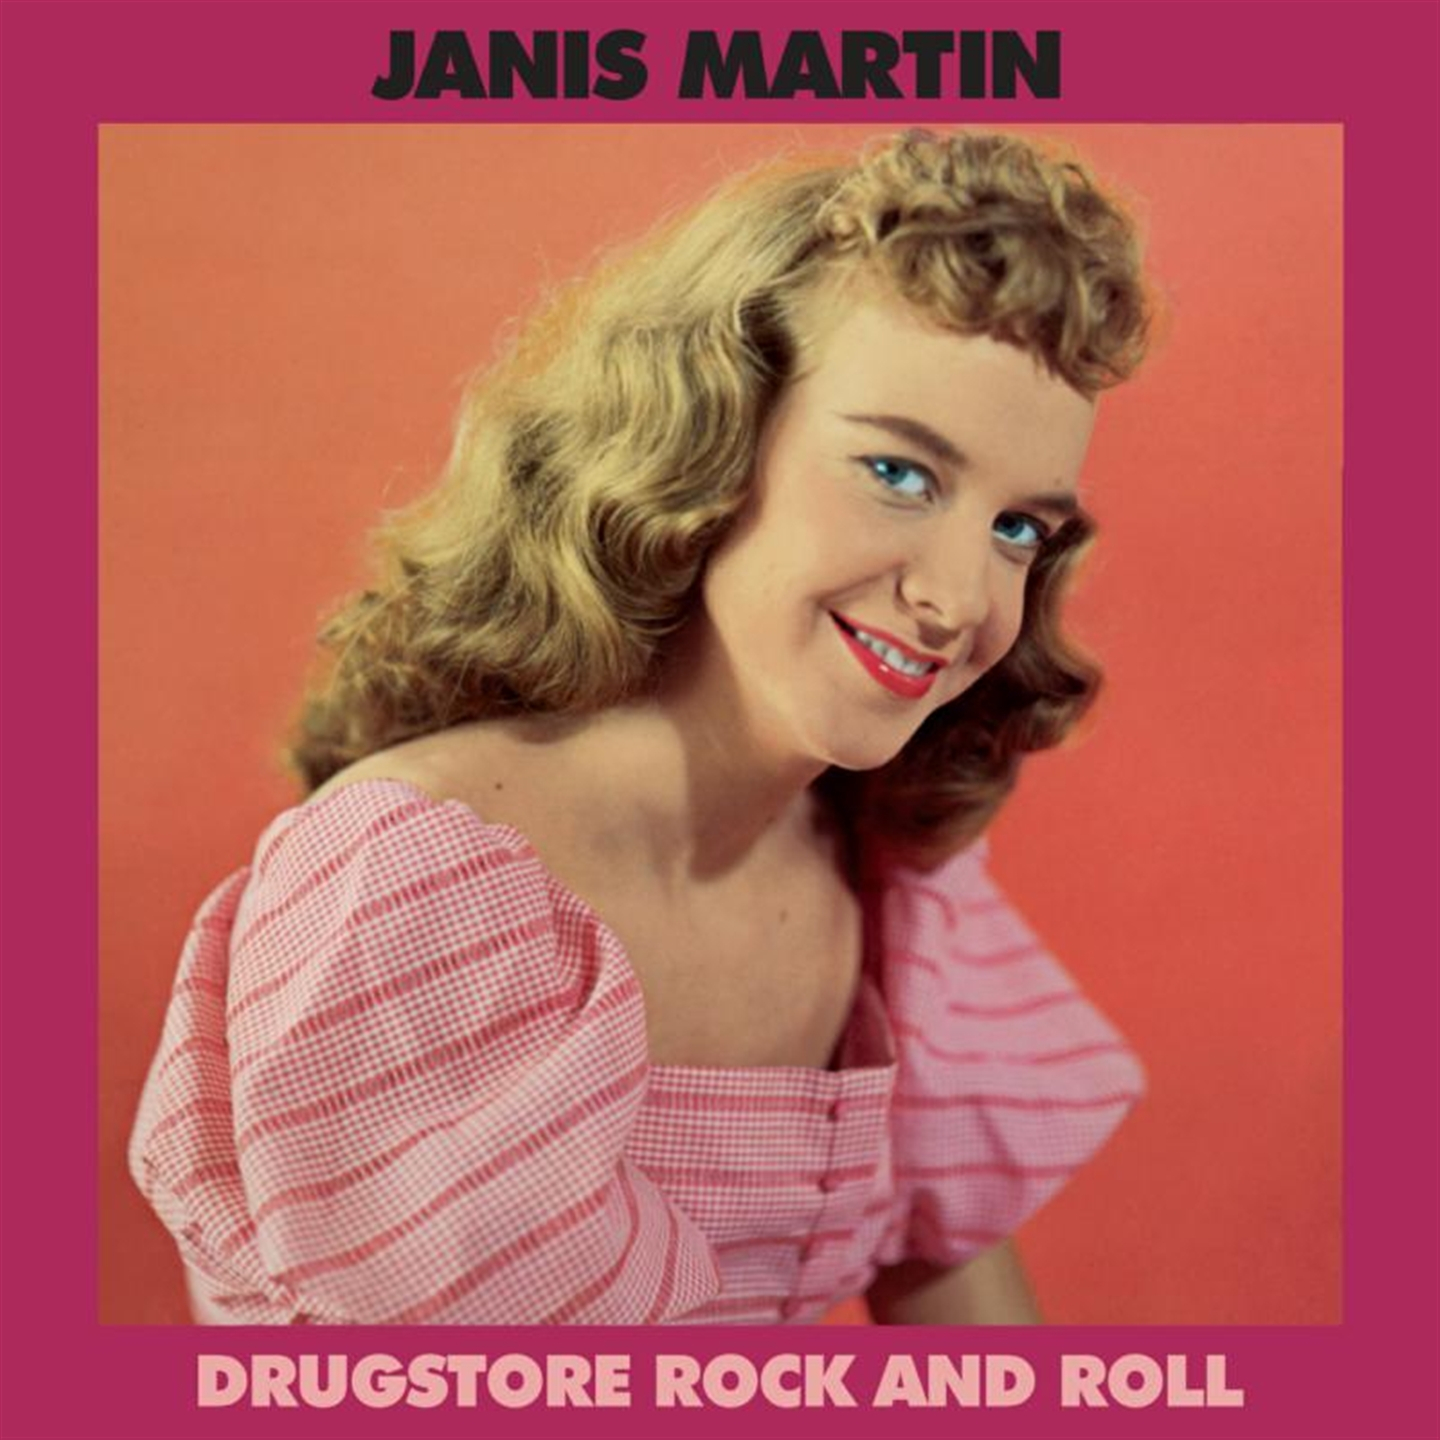 DRUGSTORE ROCK AND ROLL [LP]